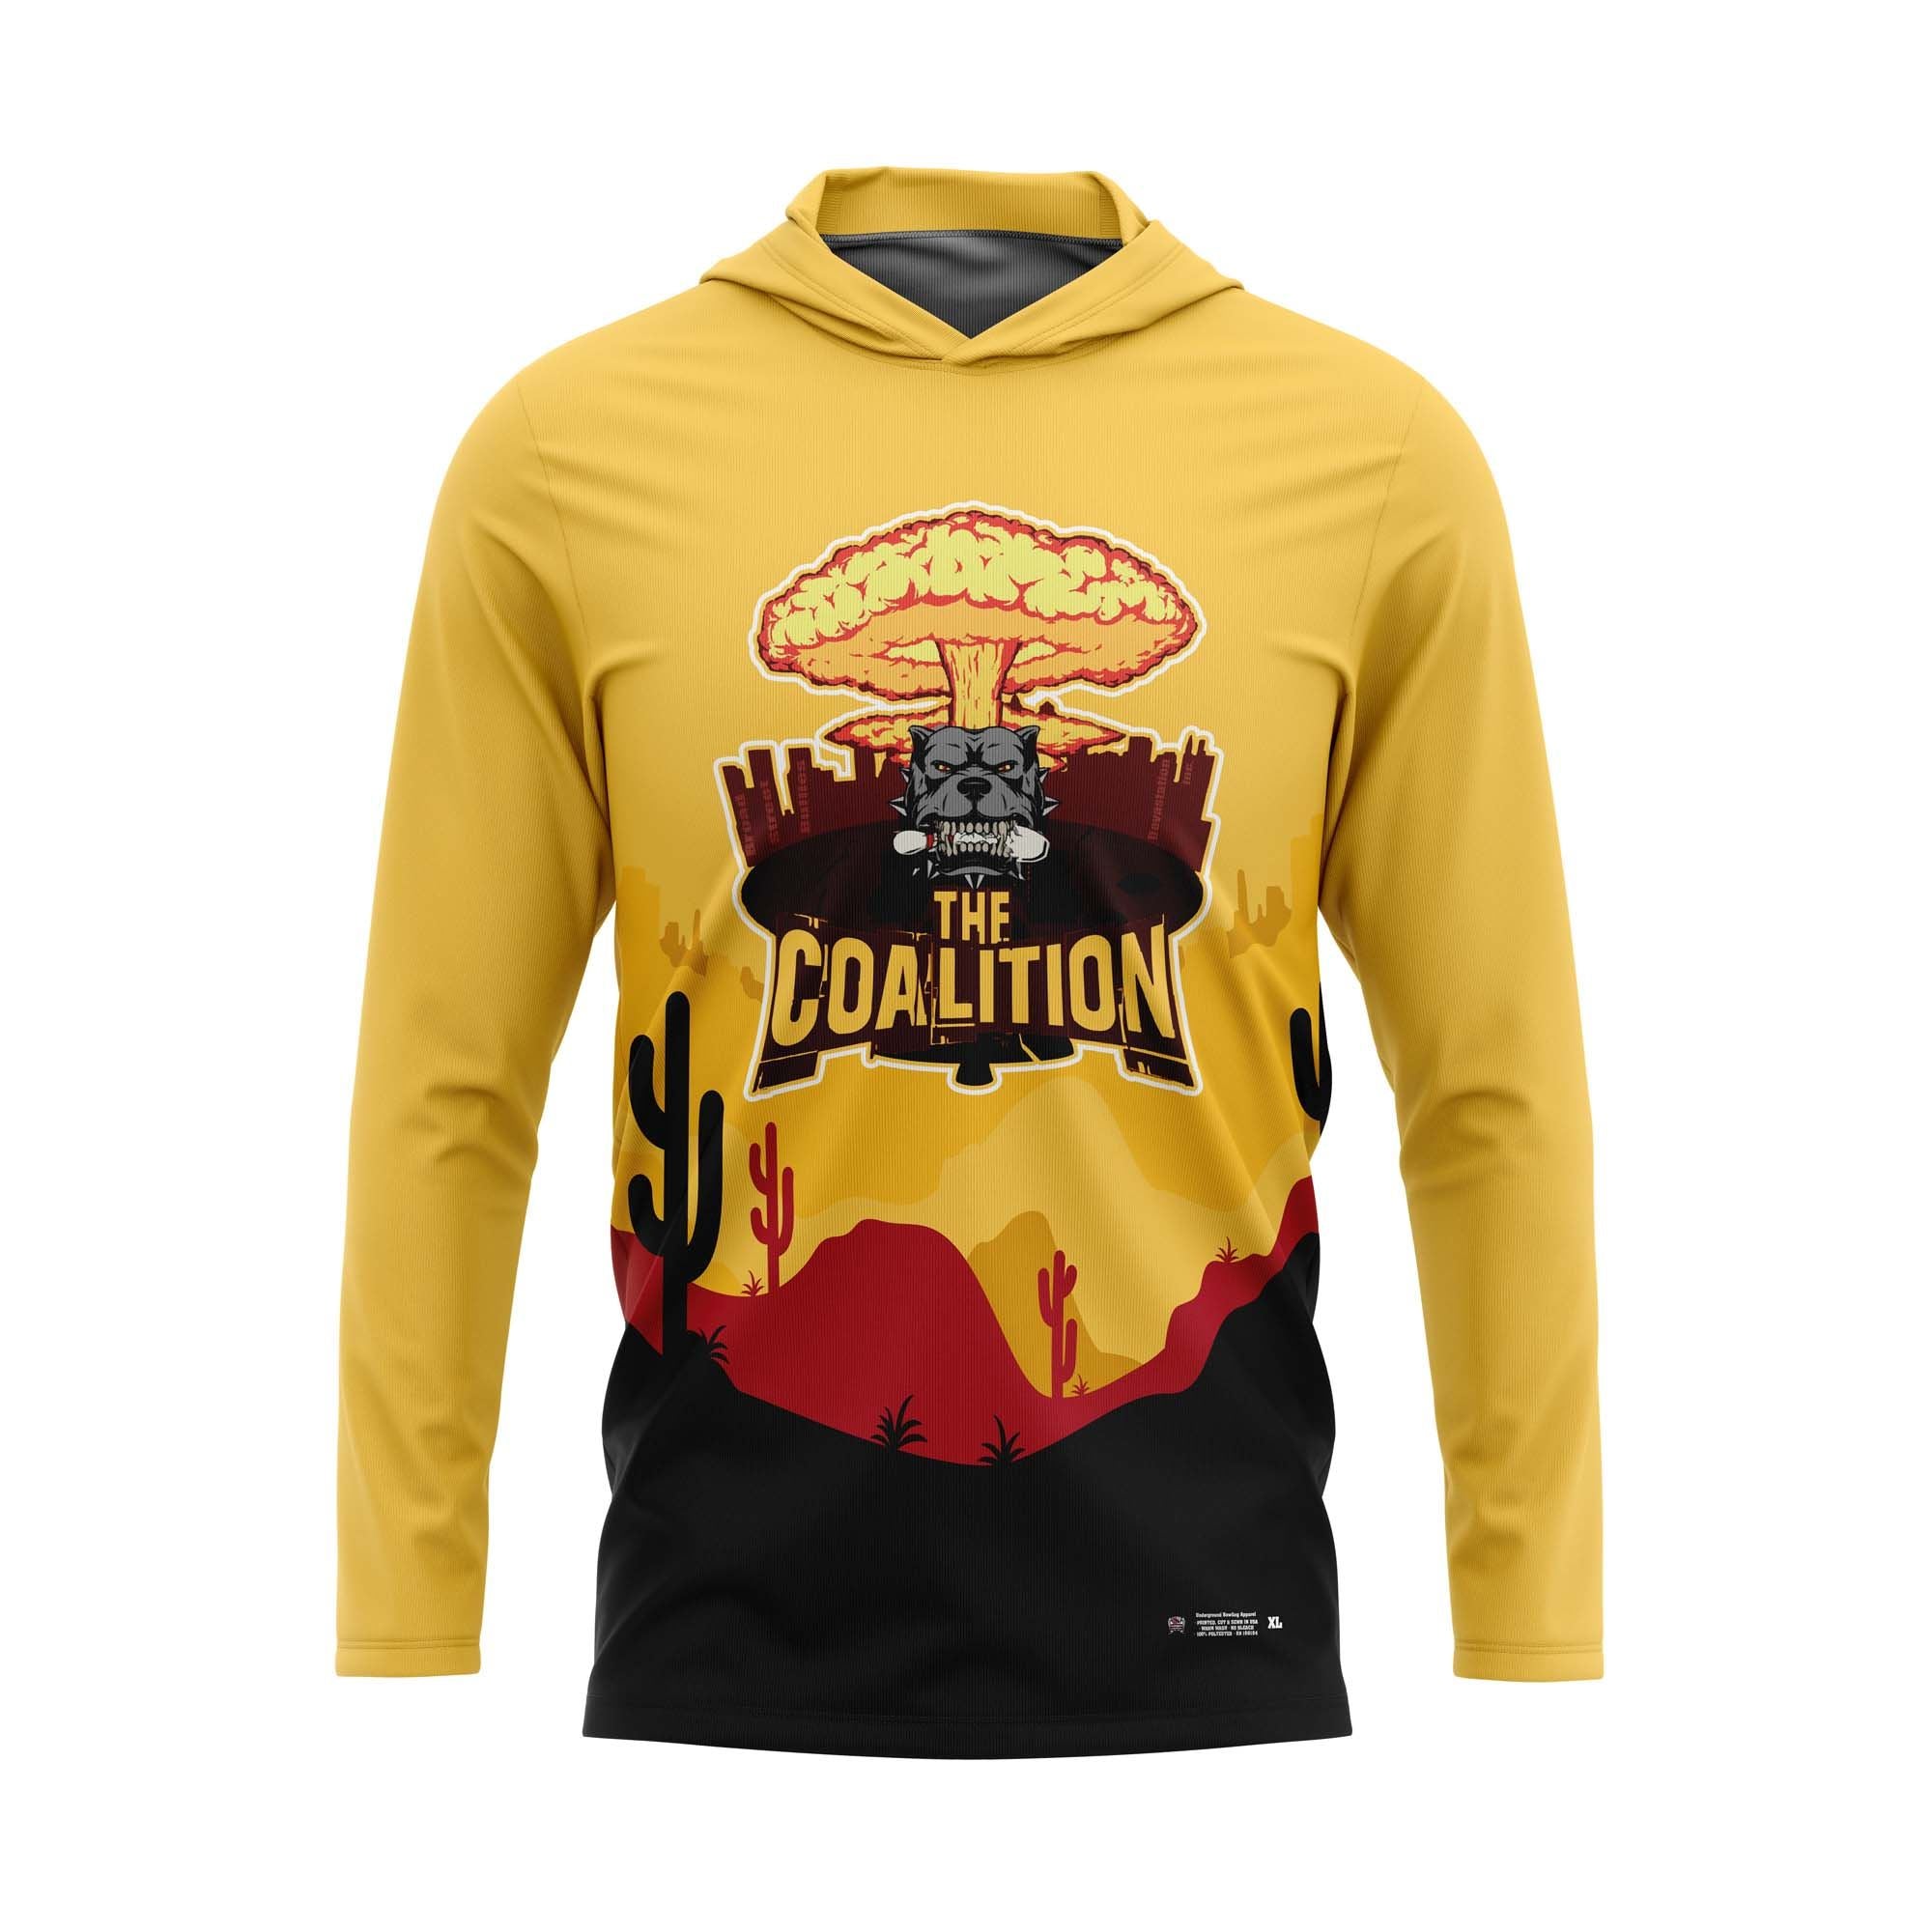 The Coalition Yellow Jersey